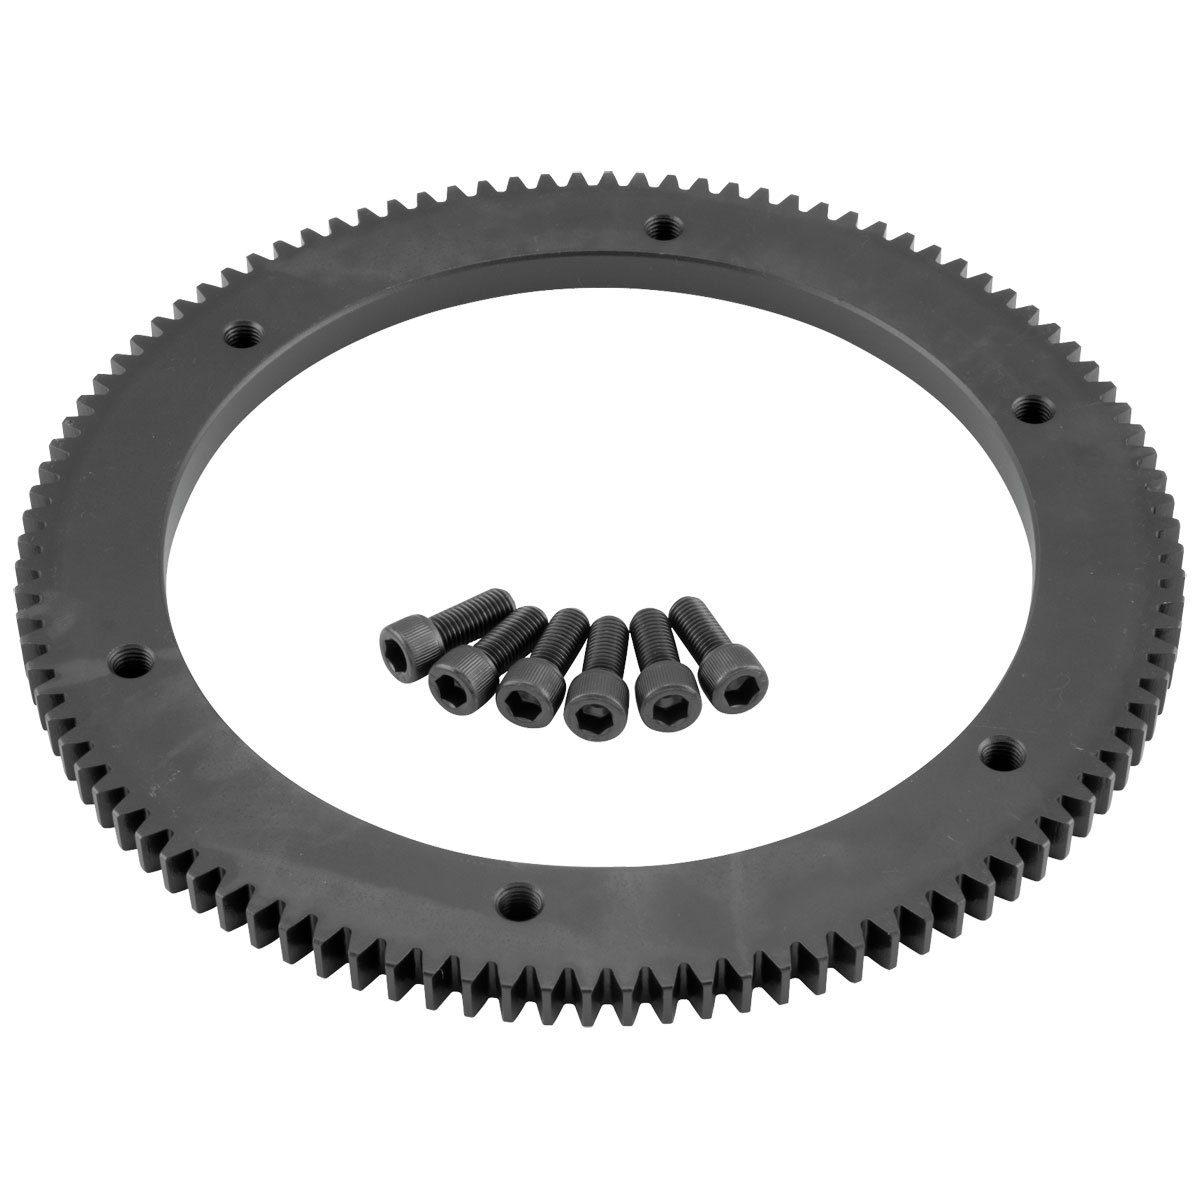 Twin Power 102 Tooth Starter Ring Gear